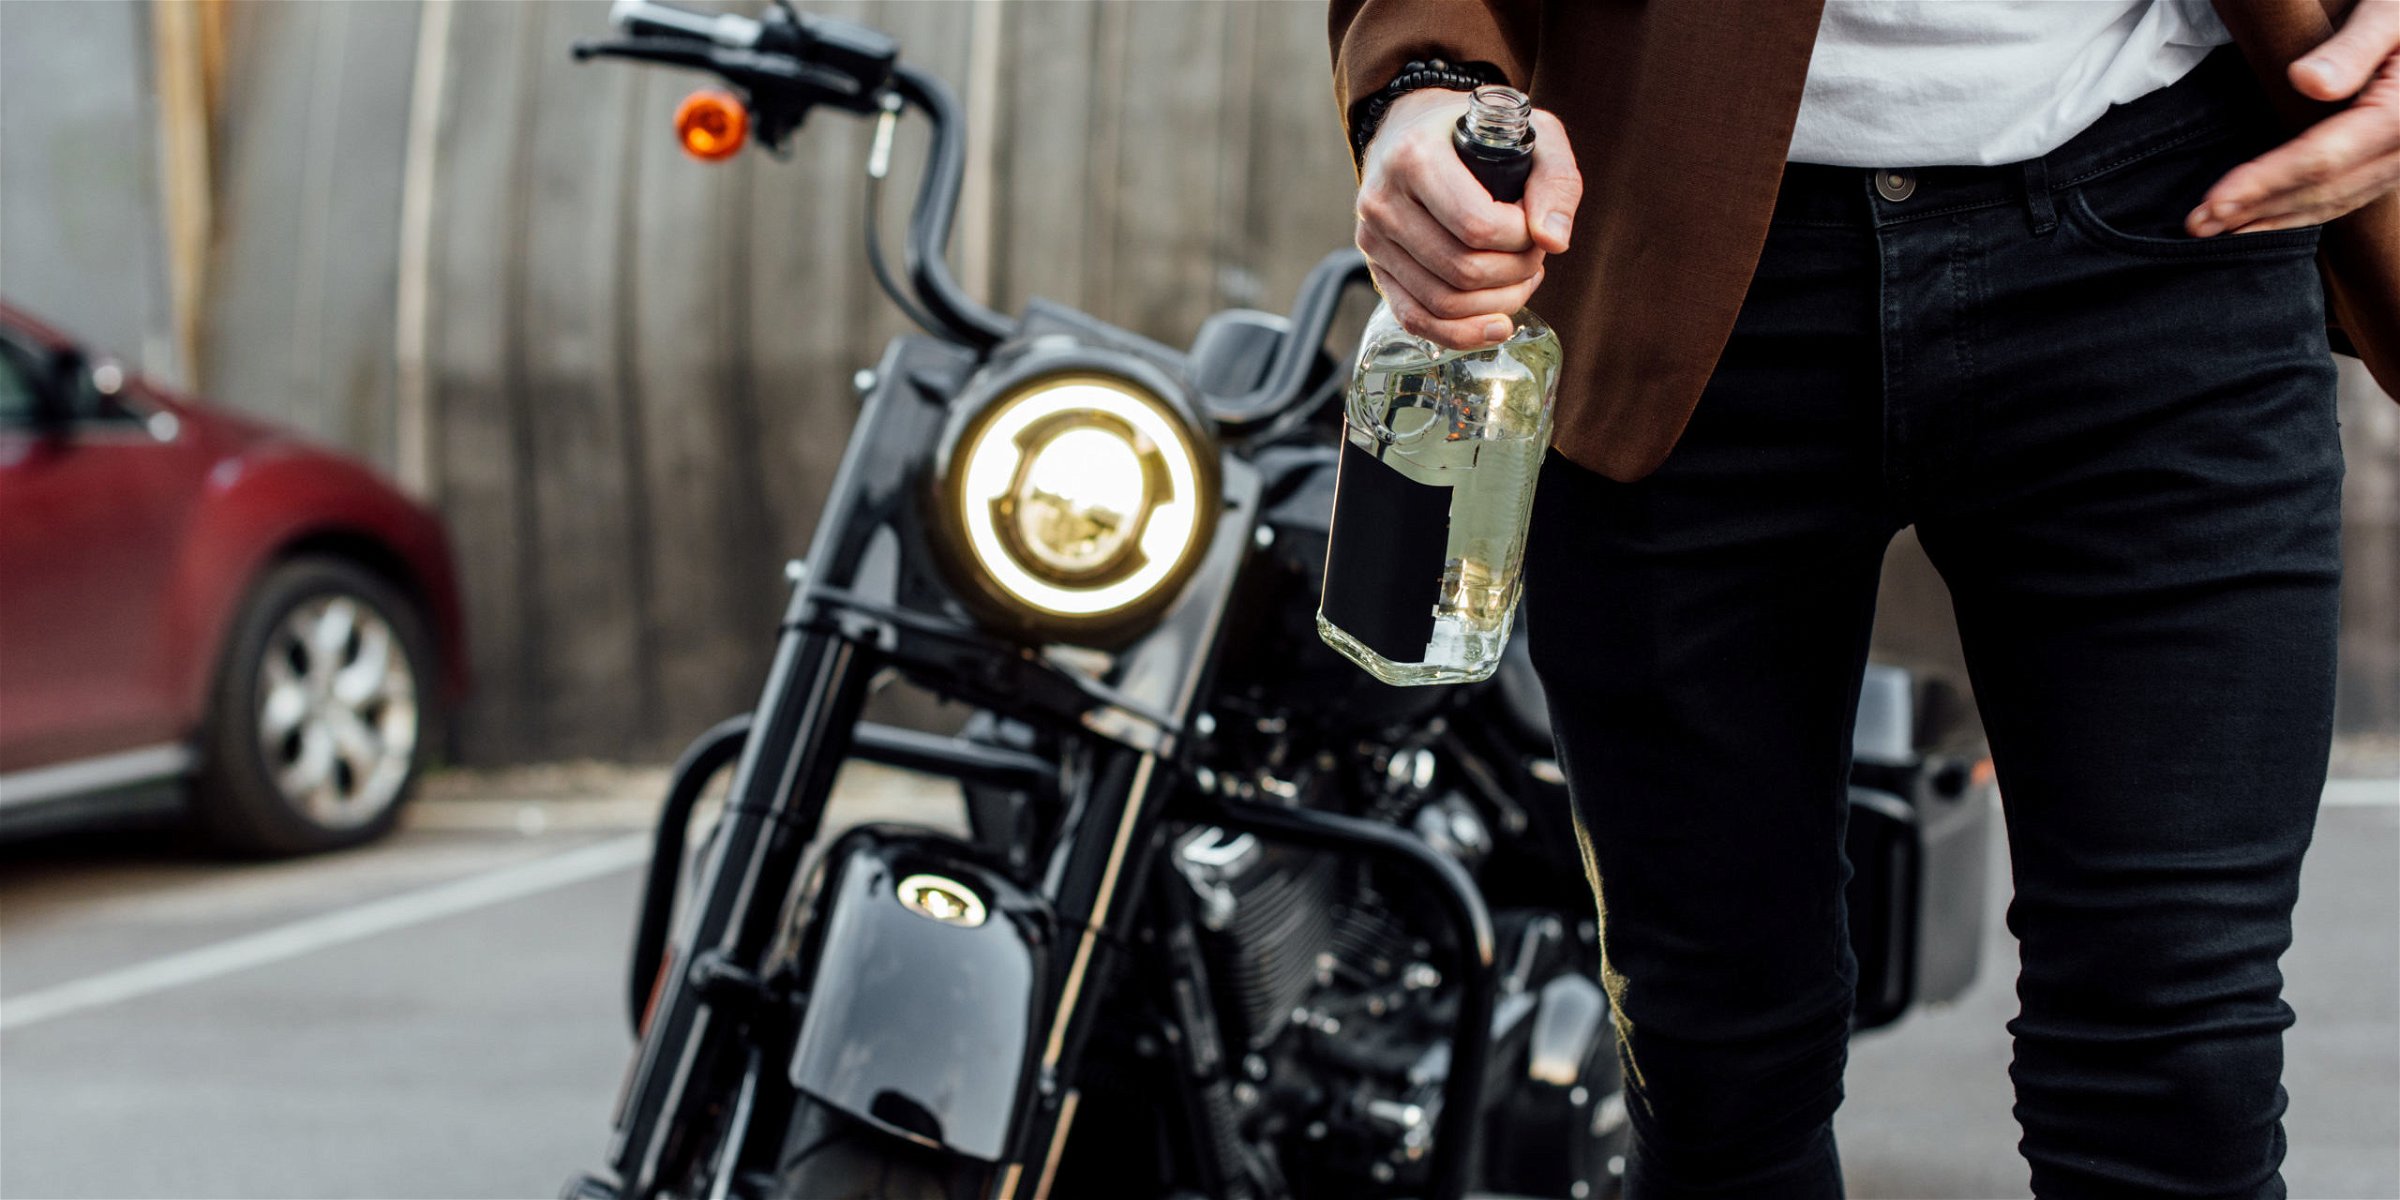 Riding a motorcycle after drinking is not recommended, but just because you had one drink may not mean you are liable for an accident. Comparative negligence laws in South Carolina may mean you still have a case if another party is at fault.